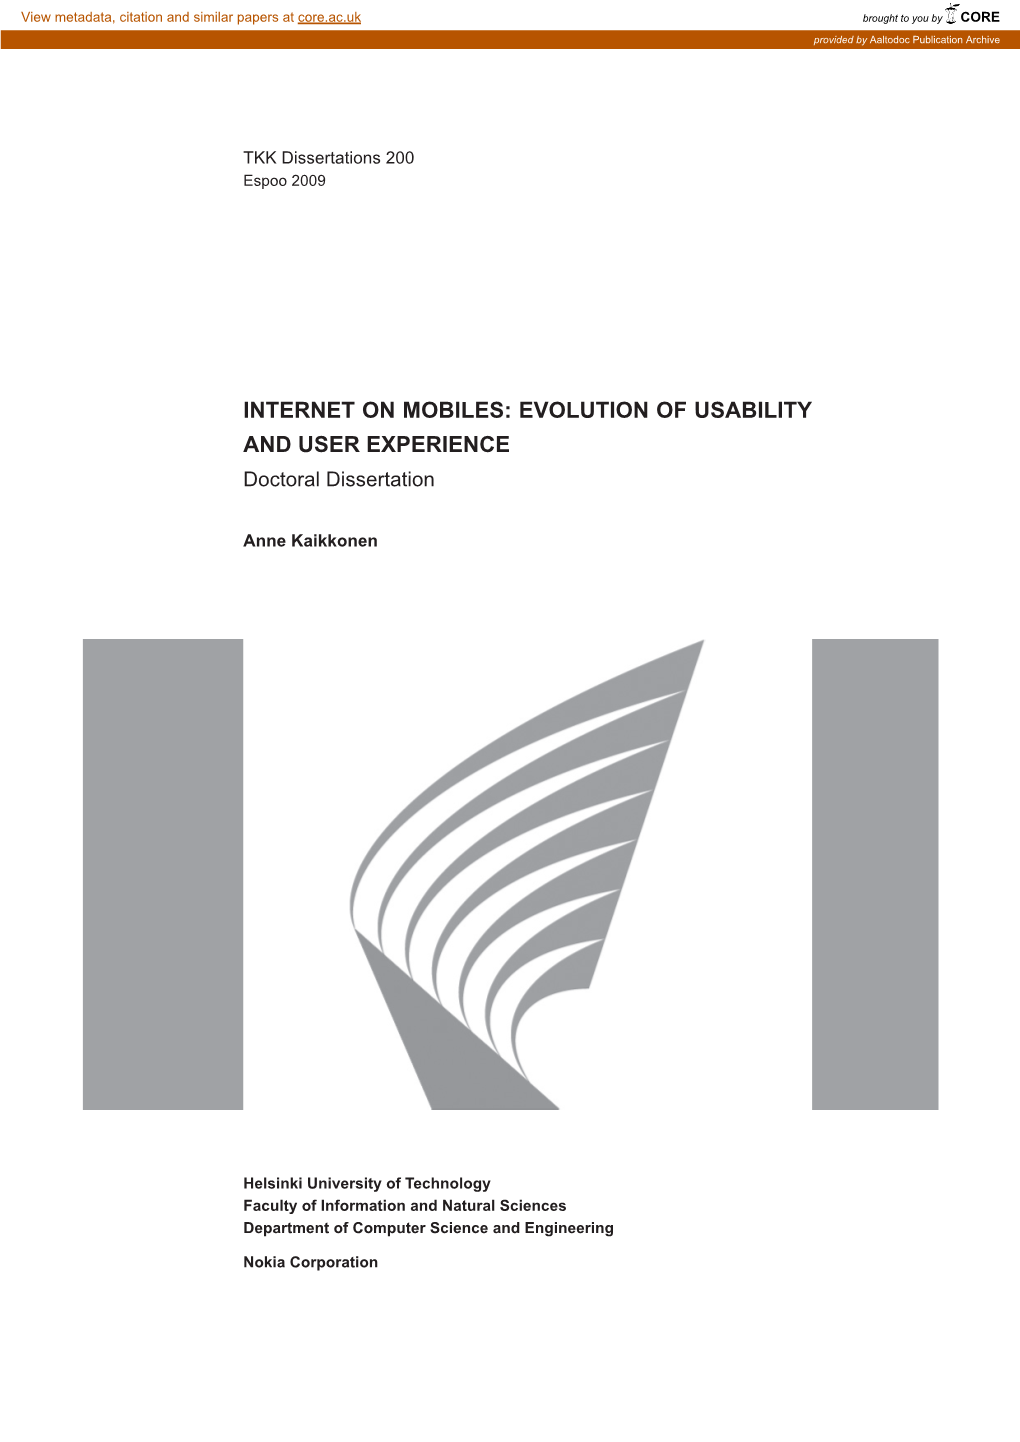 INTERNET on MOBILES: EVOLUTION of USABILITY and USER EXPERIENCE Doctoral Dissertation